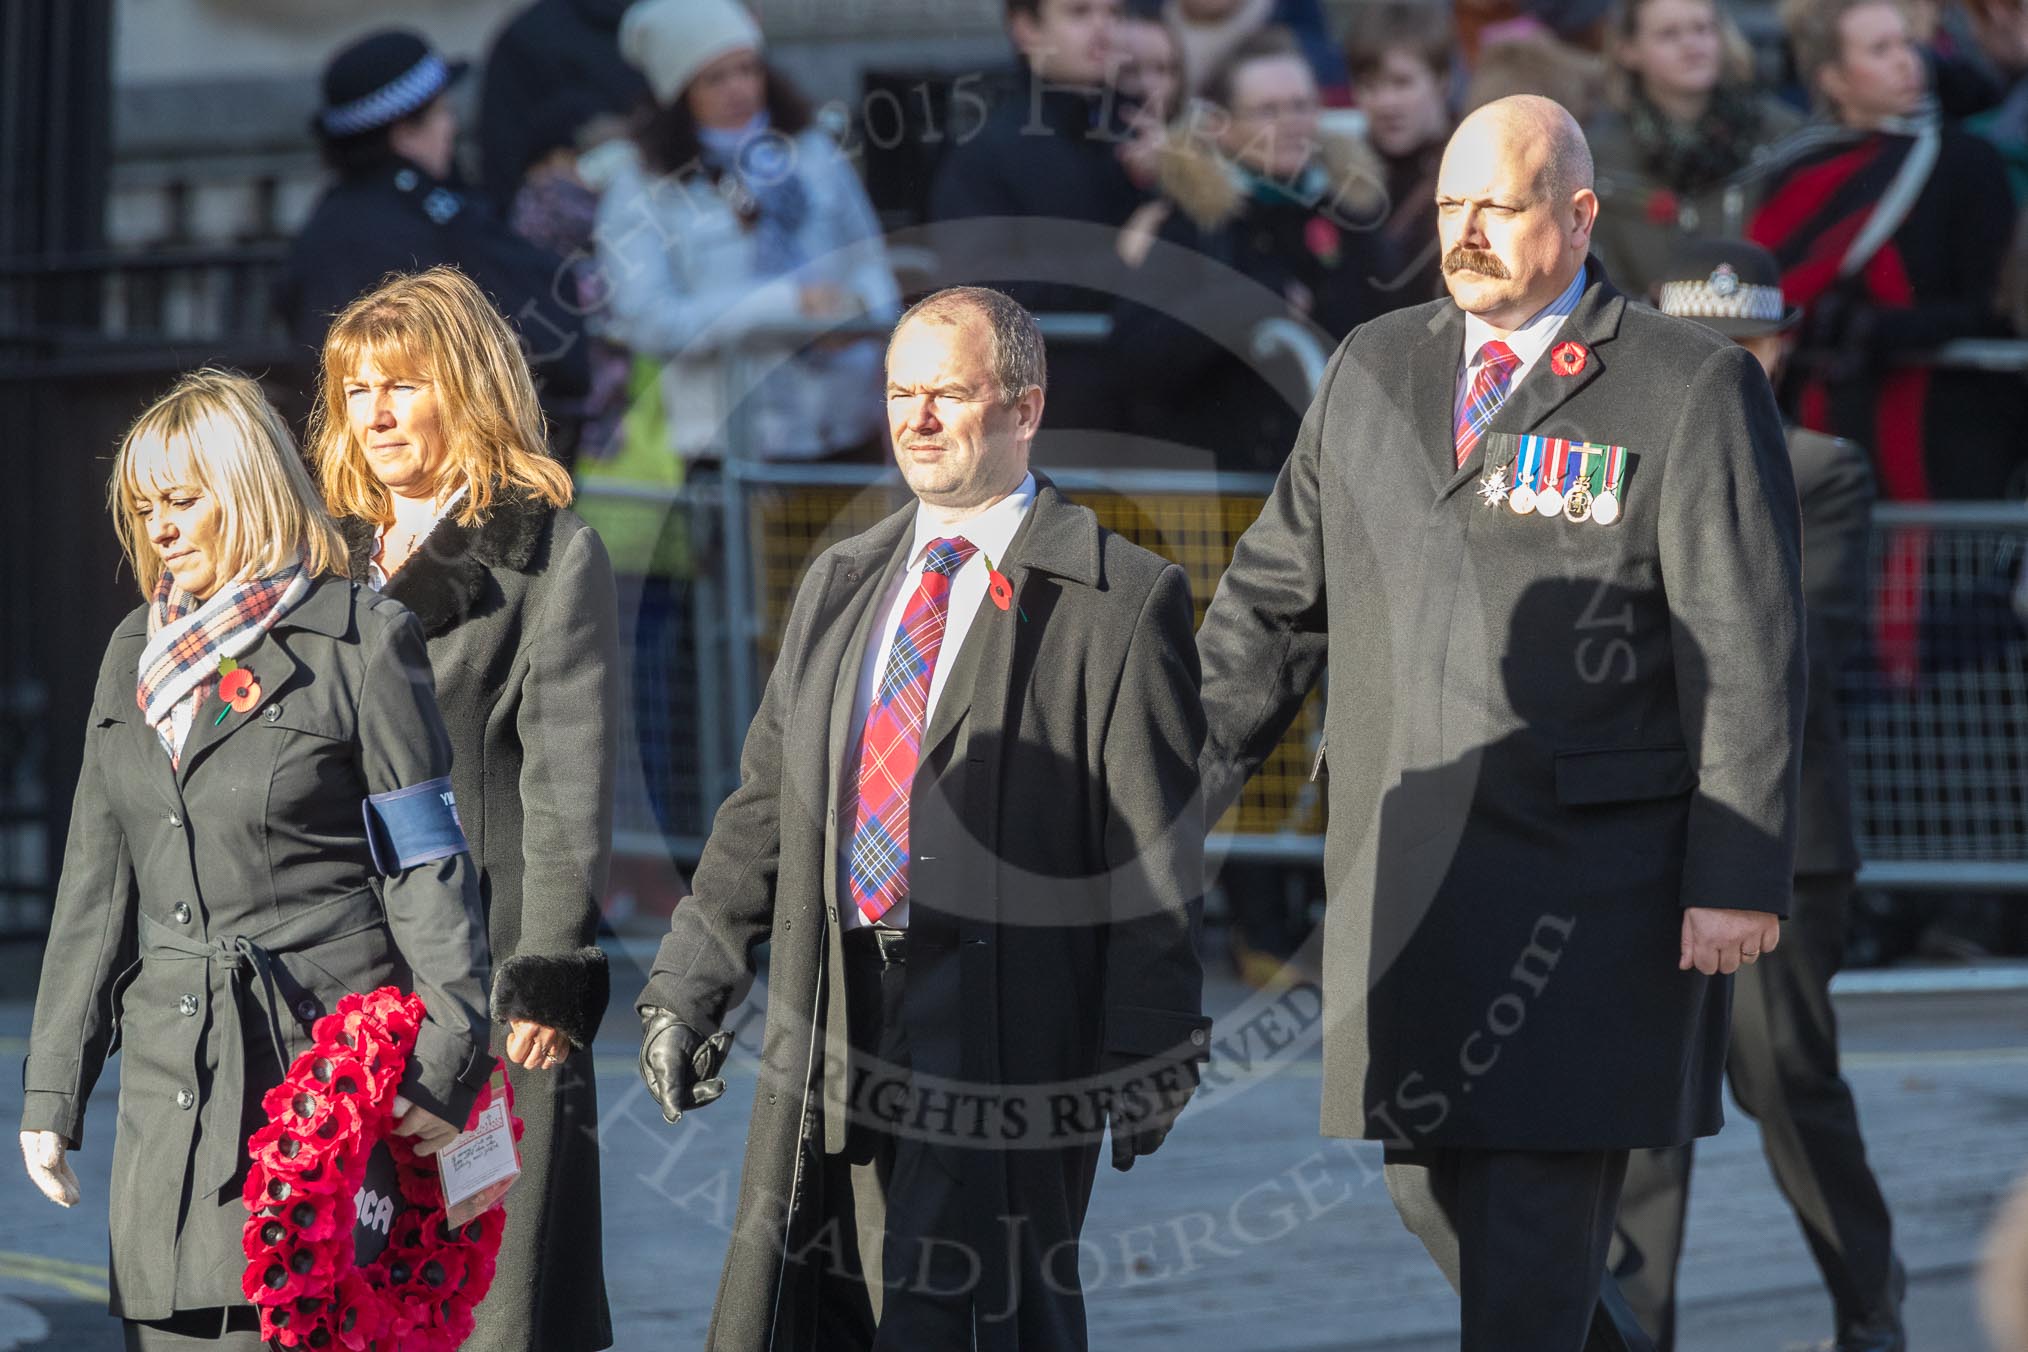 March Past, Remembrance Sunday at the Cenotaph 2016: M37 YMCA.
Cenotaph, Whitehall, London SW1,
London,
Greater London,
United Kingdom,
on 13 November 2016 at 13:19, image #2911